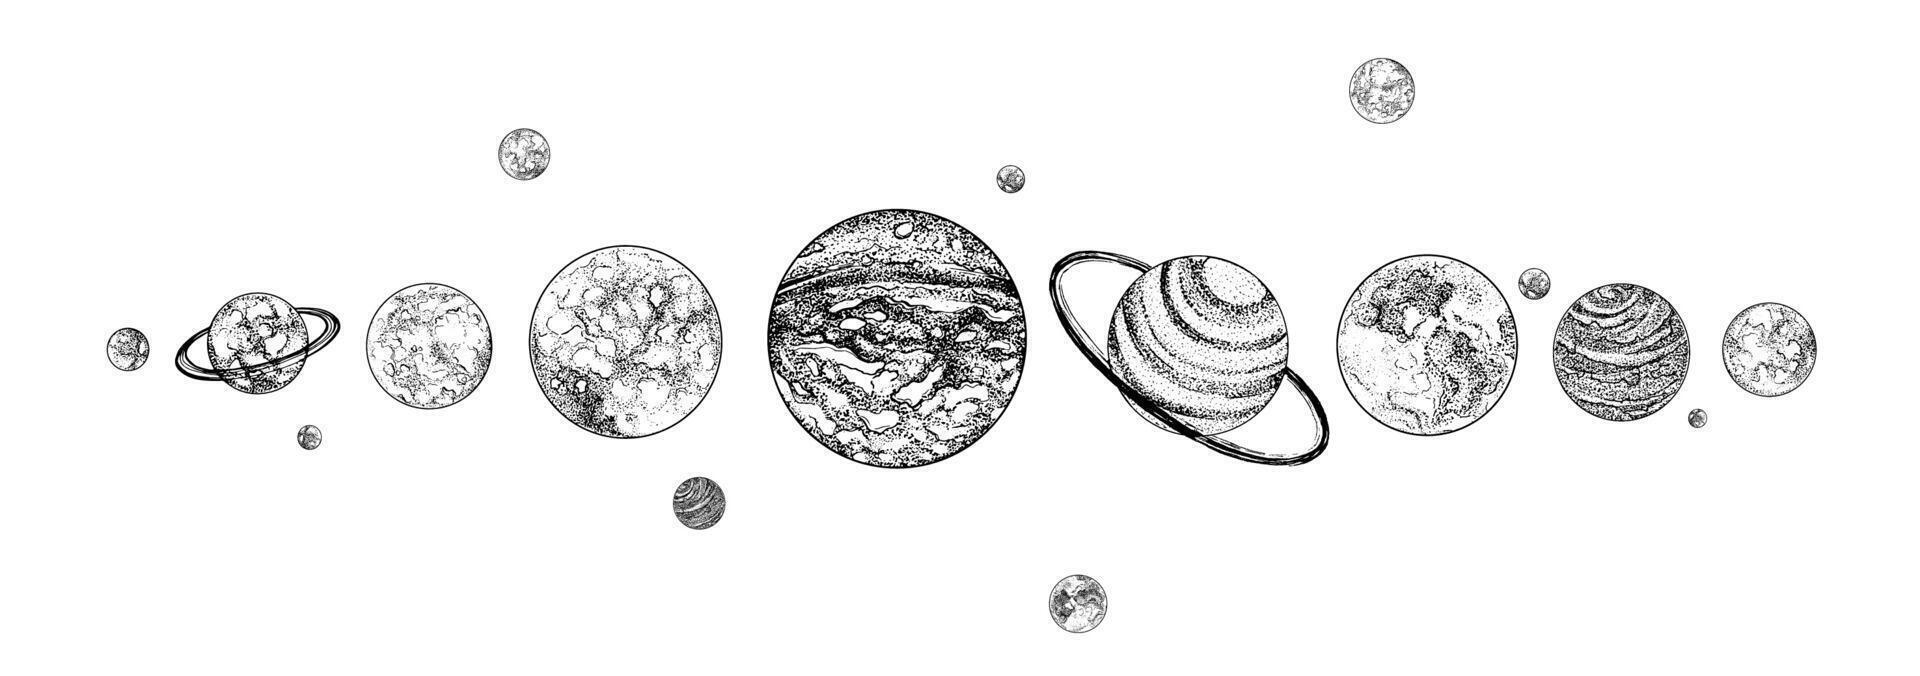 Planets lined up in row. Solar system drawn in monochrome colors. Gravitationally bound celestial bodies in outer space. Natural cosmic objects arranged in horizontal line. illustration. vector